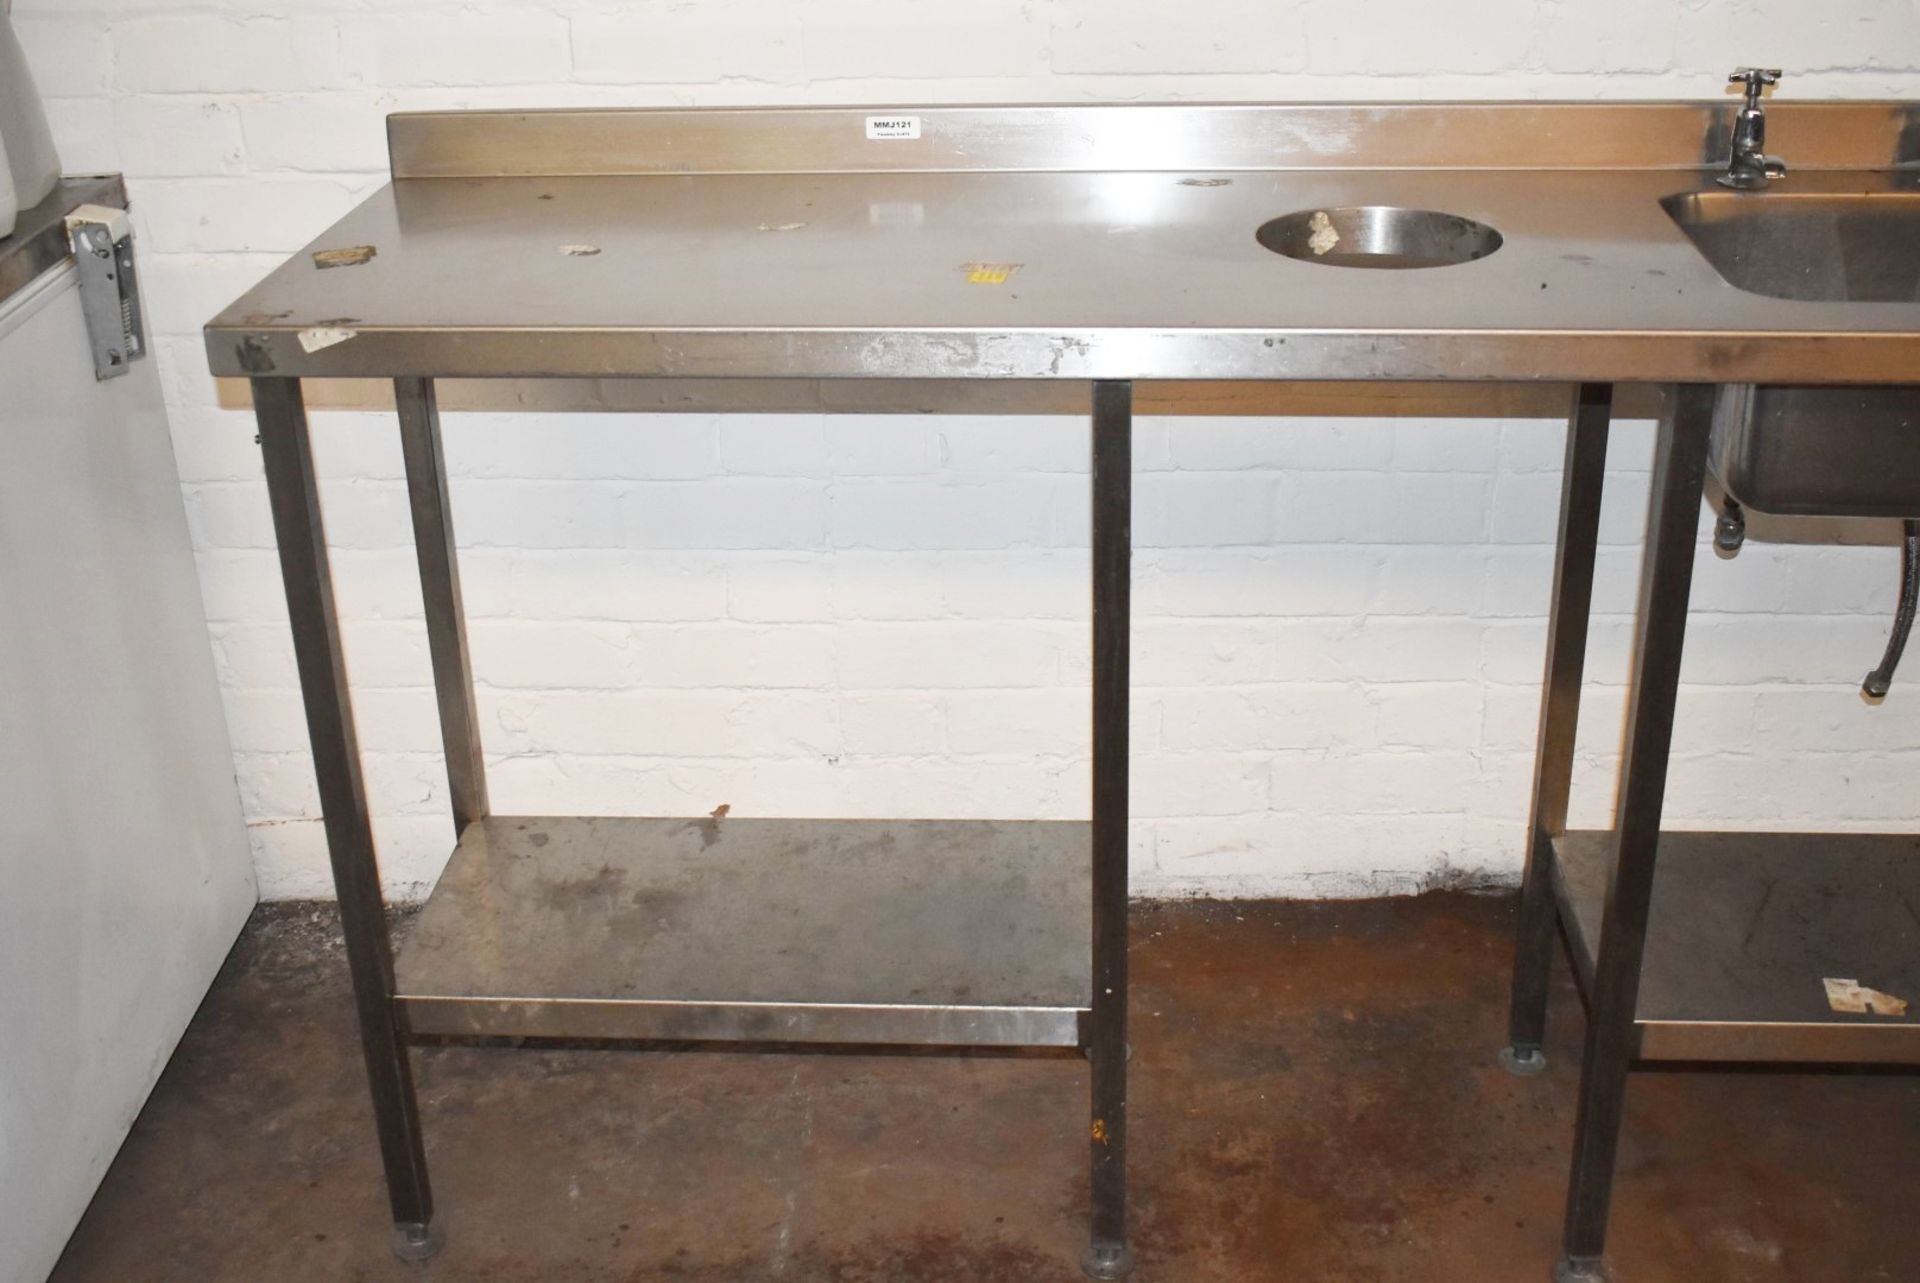 1 x Stainless Steel Sink Unt Featuring Single Wash Bowl, Taps, Prep Area and Central Waste Bin Chute - Image 7 of 8